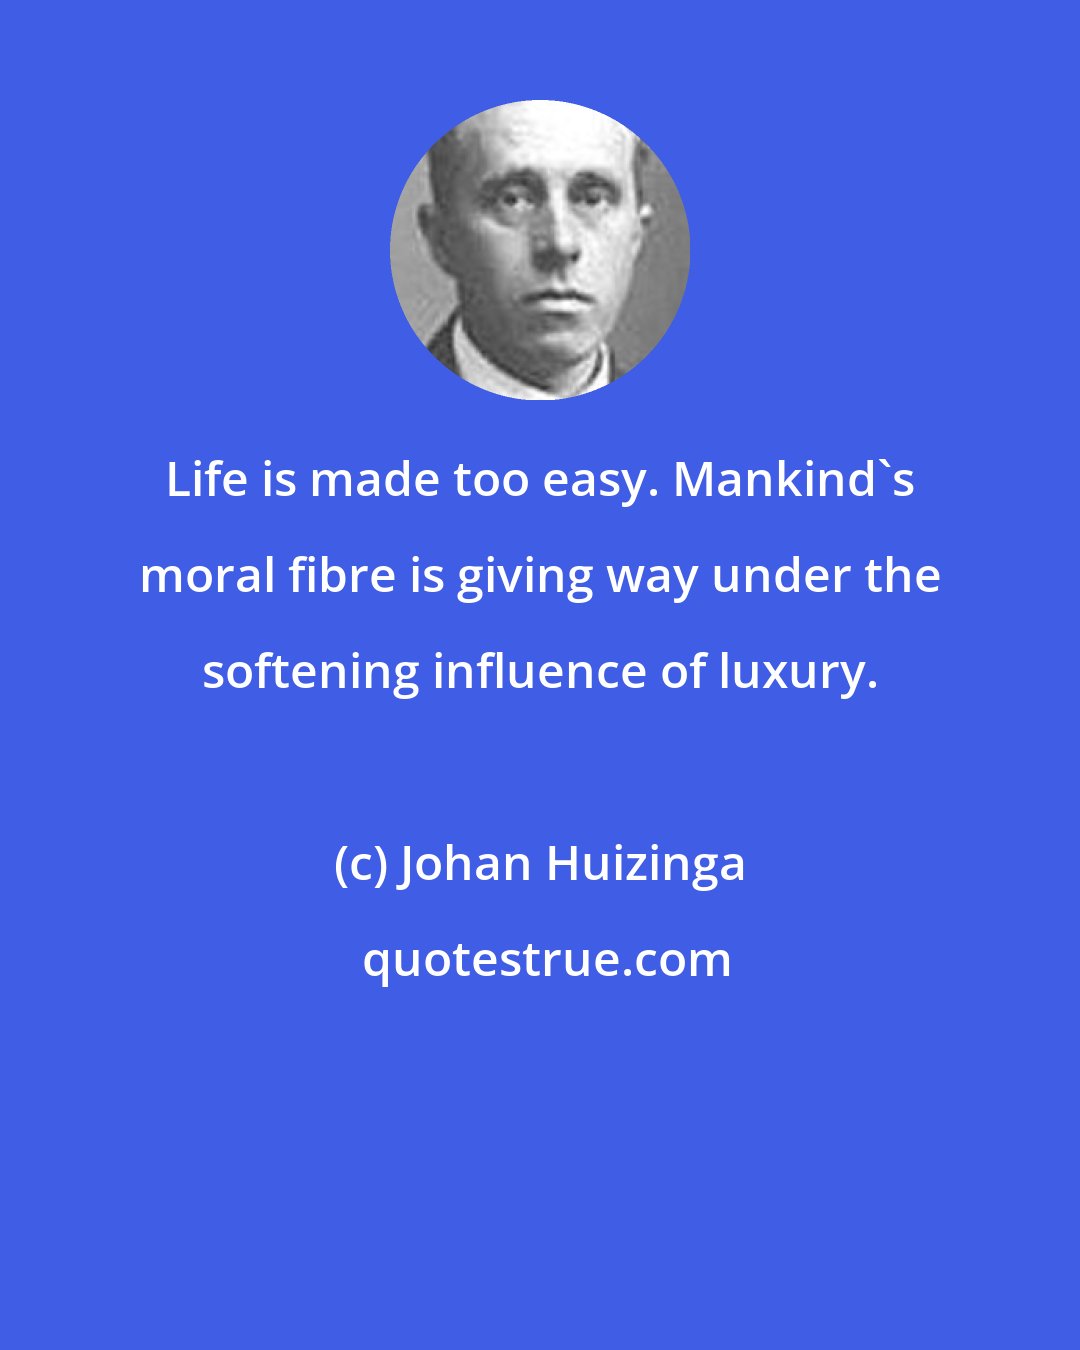 Johan Huizinga: Life is made too easy. Mankind's moral fibre is giving way under the softening influence of luxury.